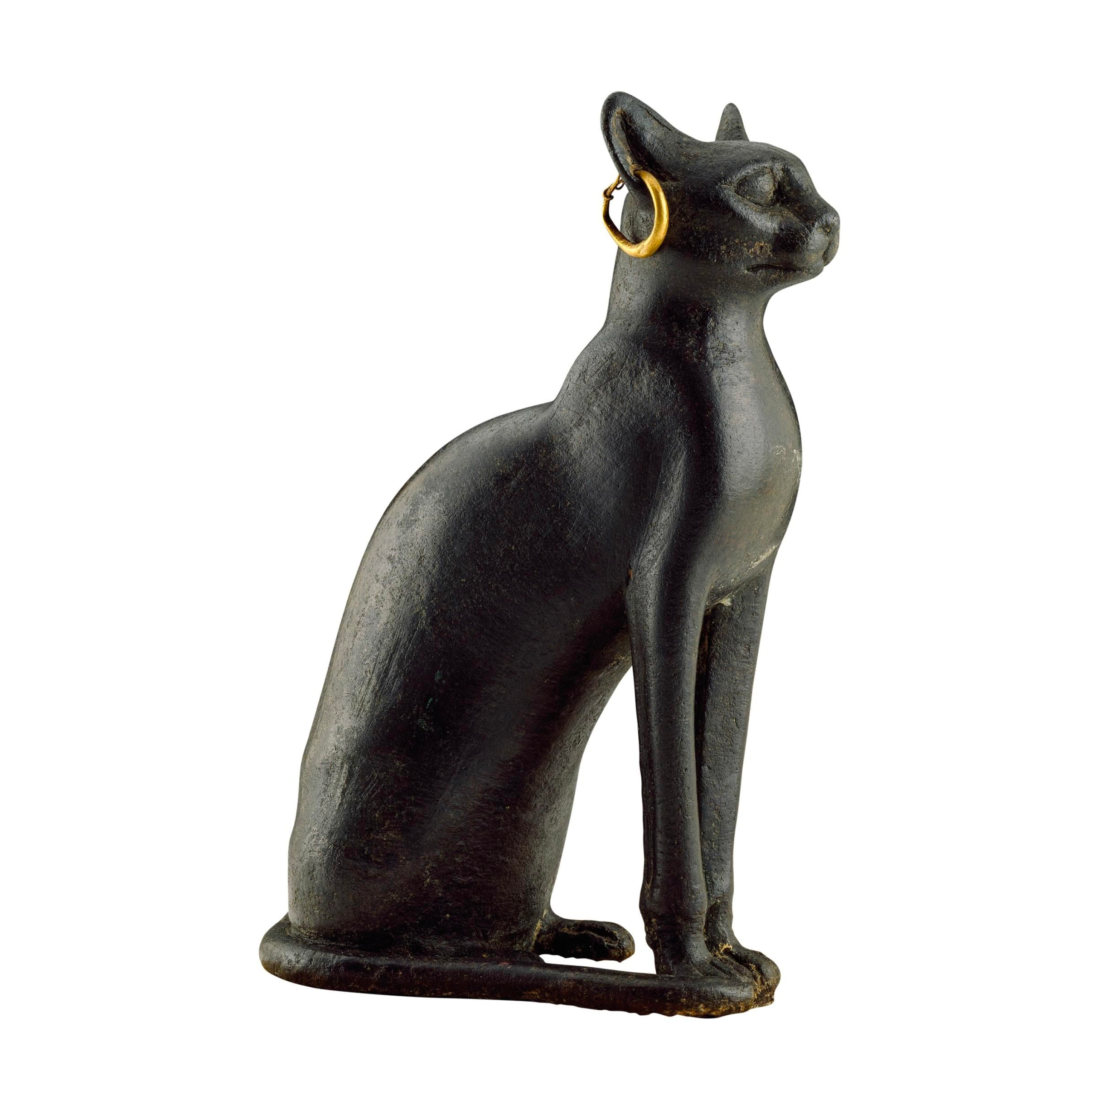 Copper statue of the cat goddess Bastet. Eighth to fourth centuries B.C. PHOTOGRAPH BY MARY EVANS/SCALA, FLORENCE